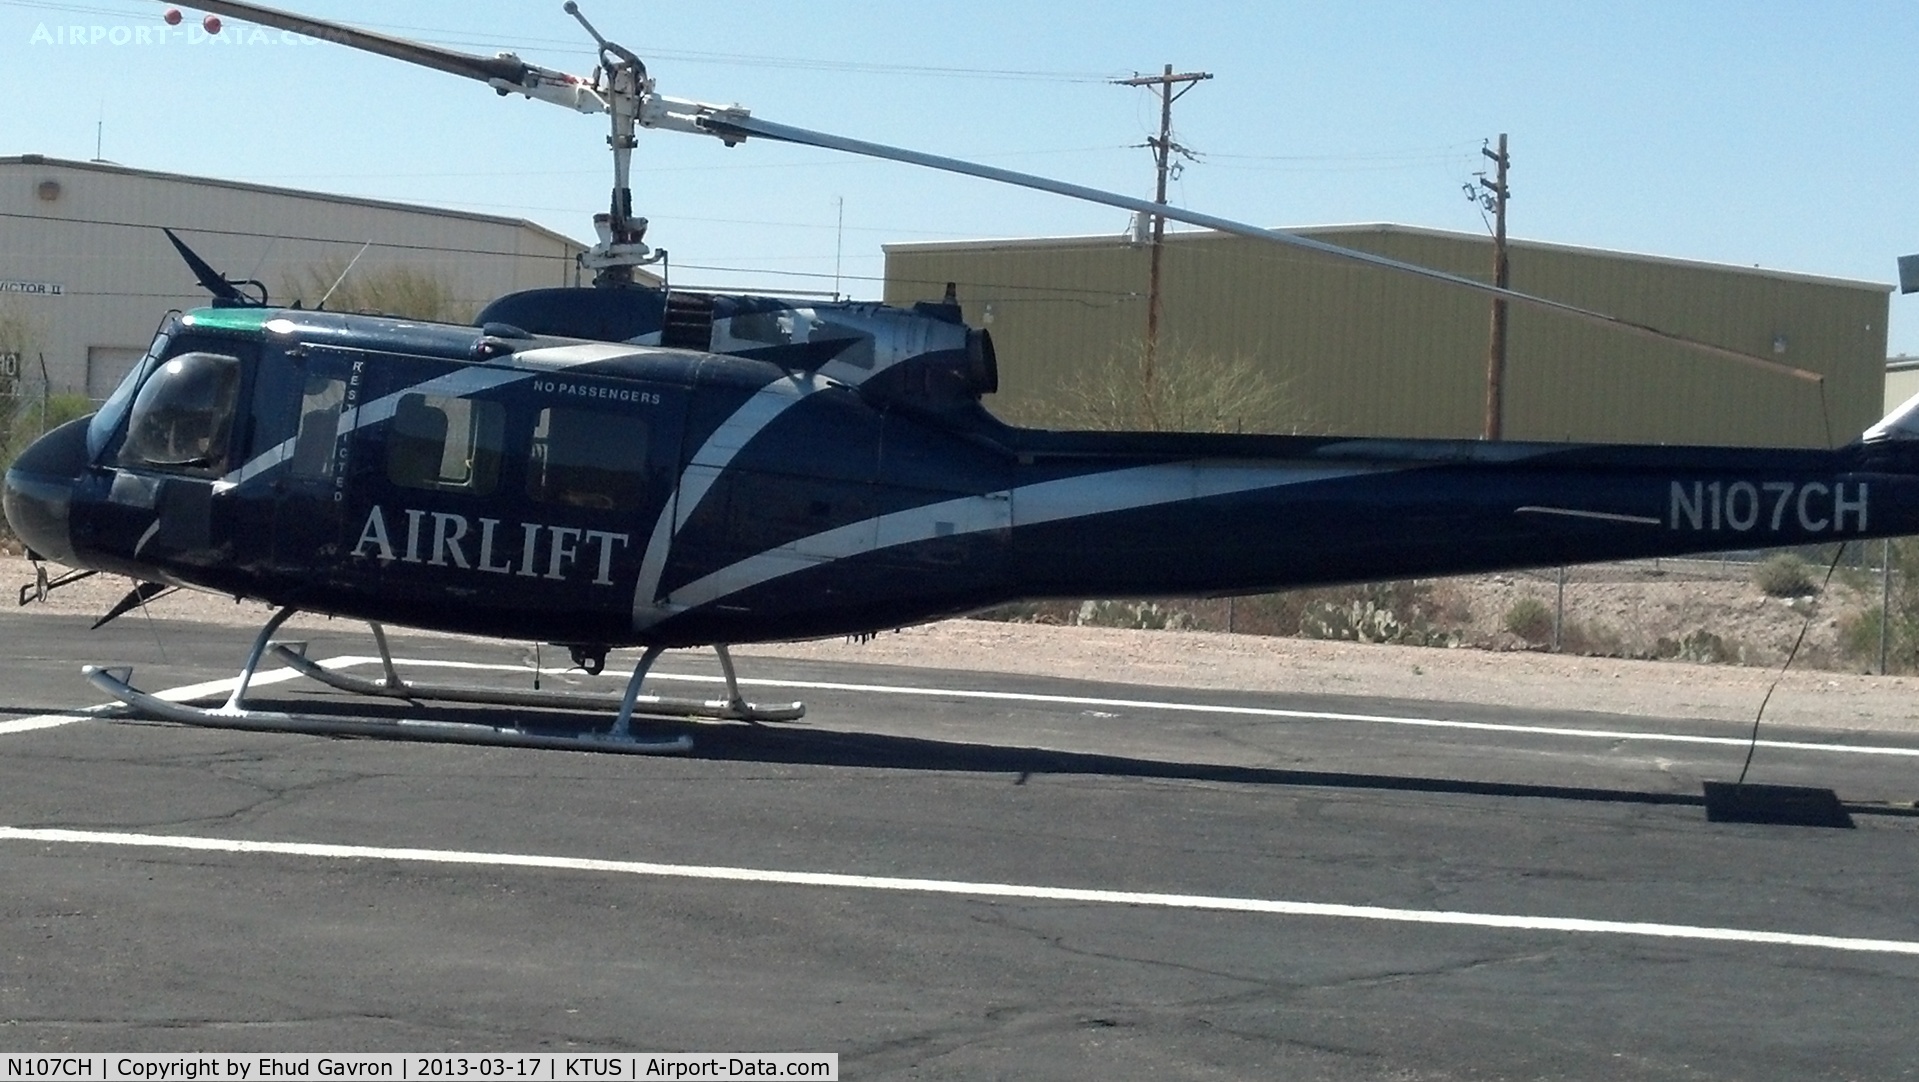 N107CH, 1967 Bell UH-1H Iroquois C/N 9488 (67-17290), N107CH in between flights, at Southwest Helicopters, Tucson AZ